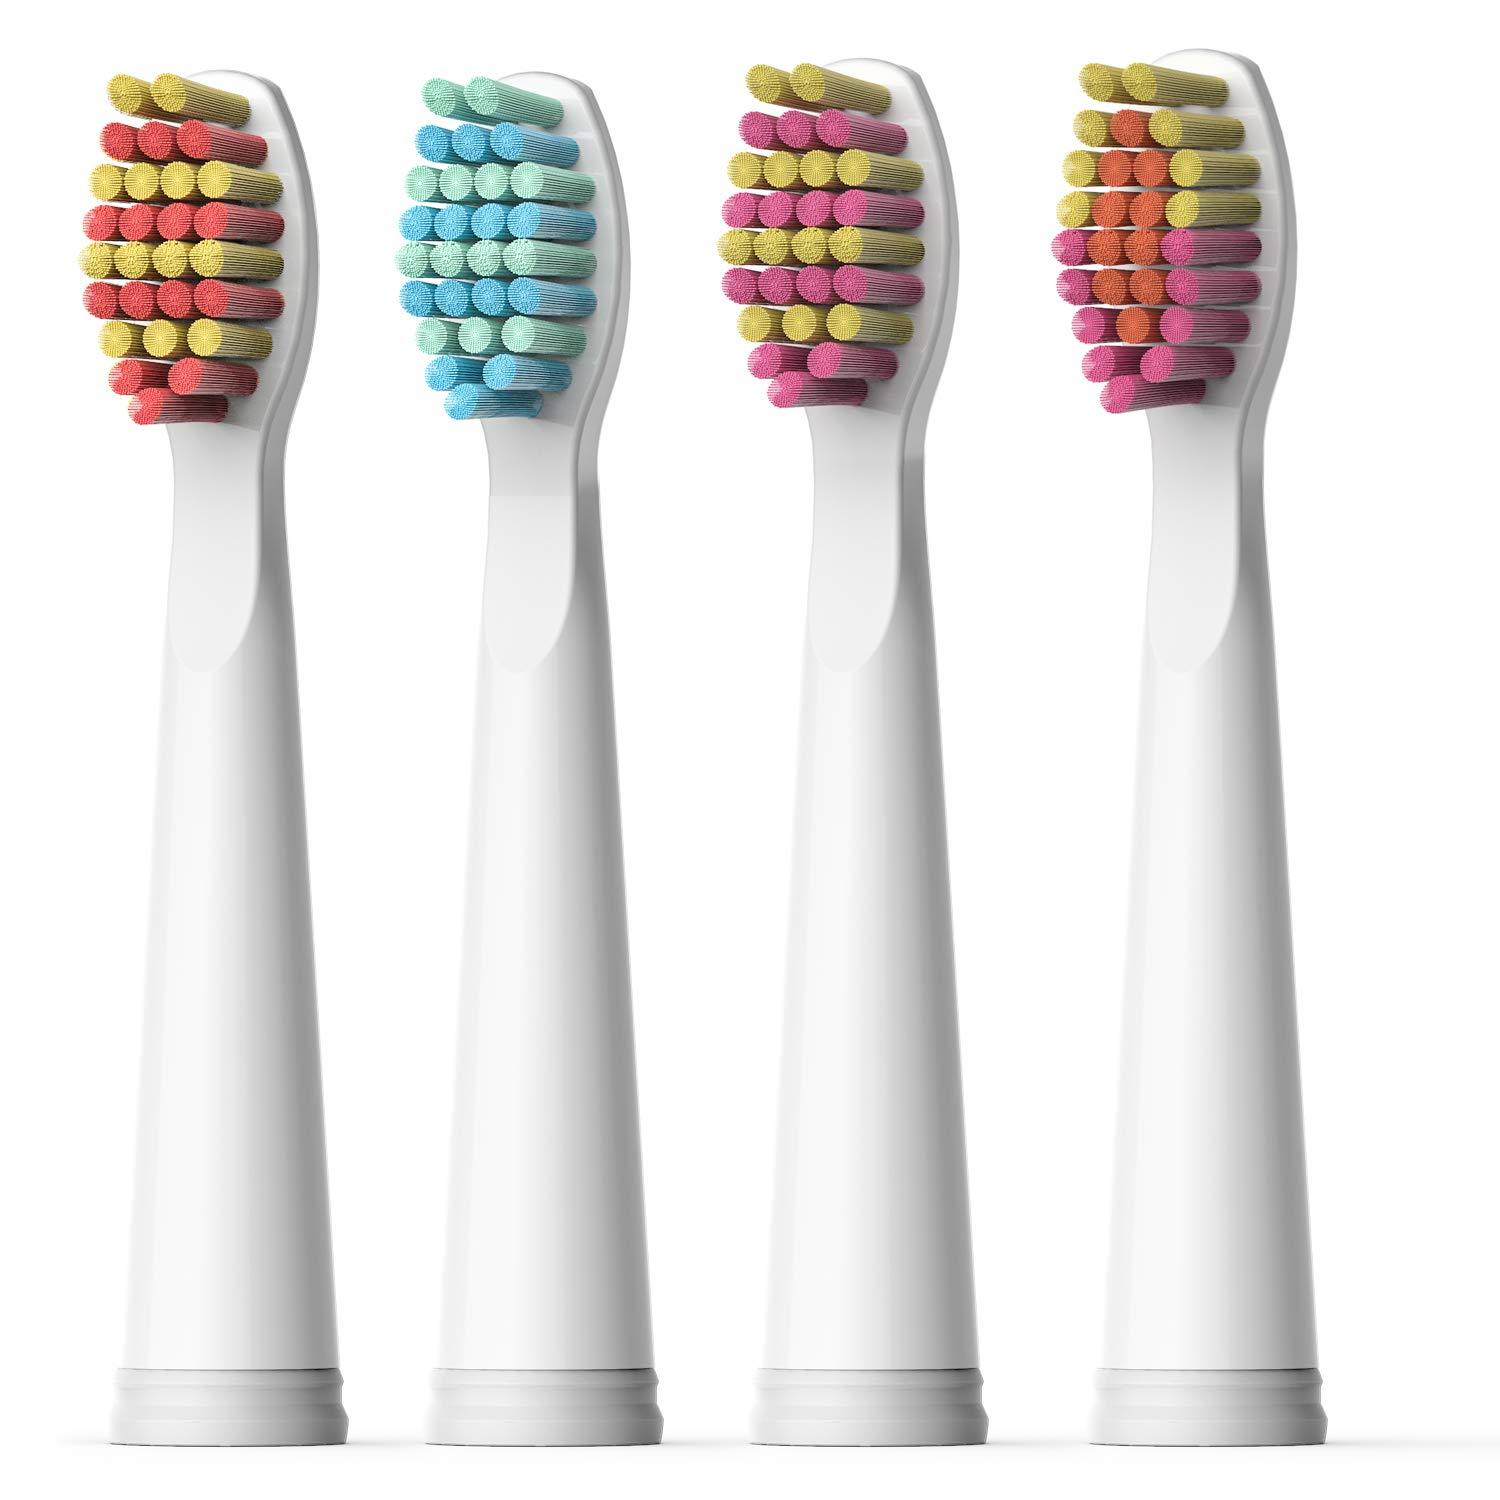 Fairywill Soft Electric Toothbrush Brush Head X 4 Fw 04